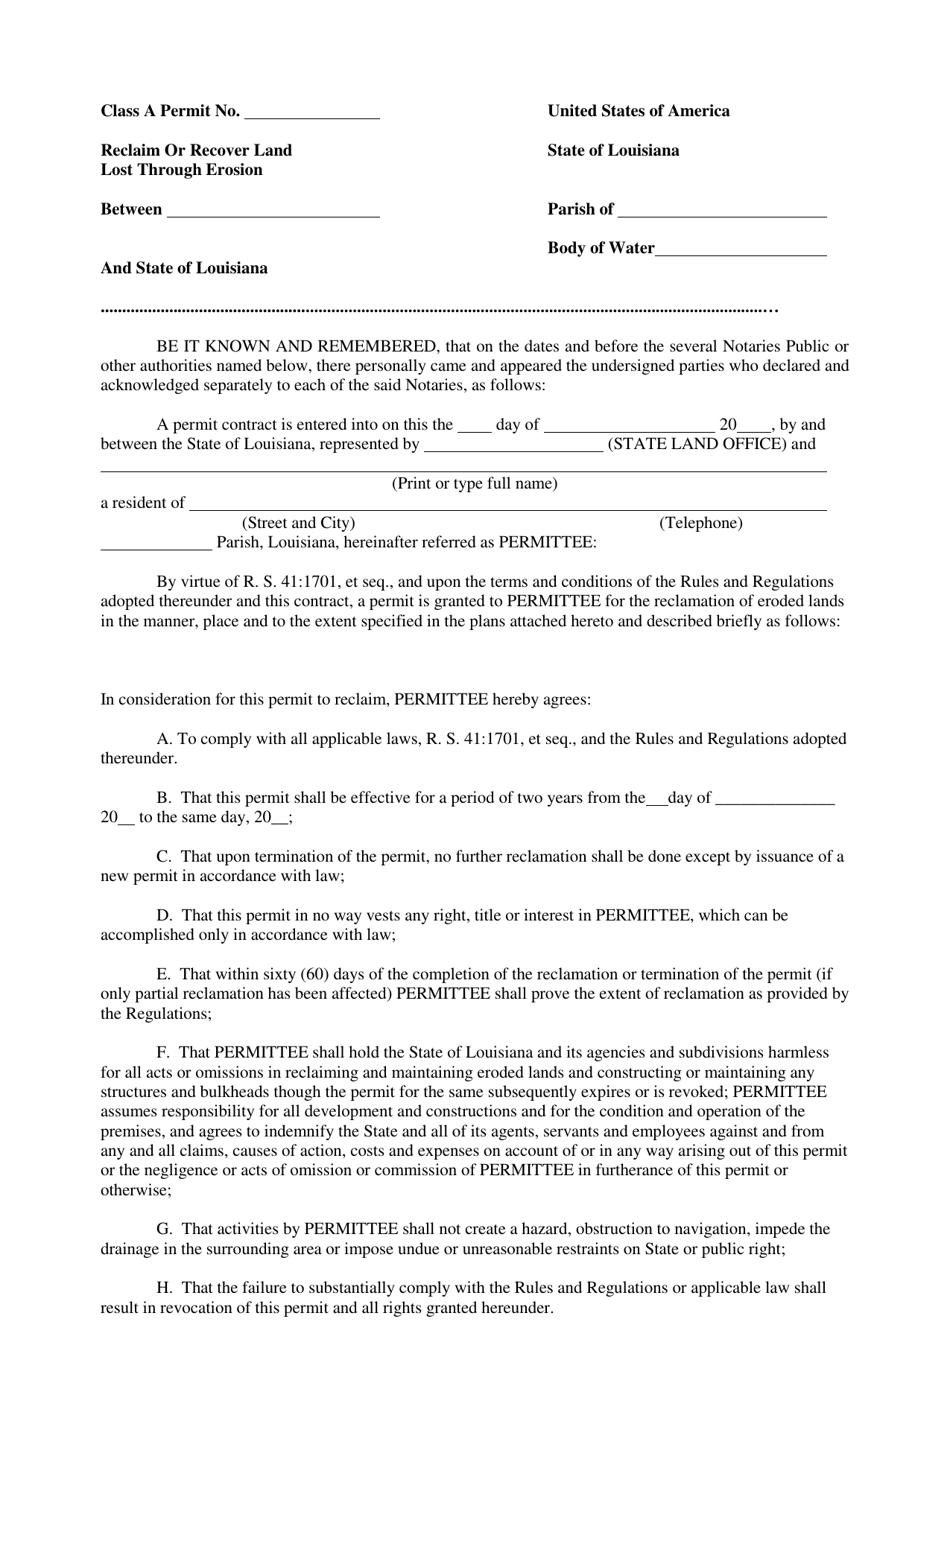 Class a Permit to Reclaim or Recover Land Lost Through Erosion - Louisiana, Page 1